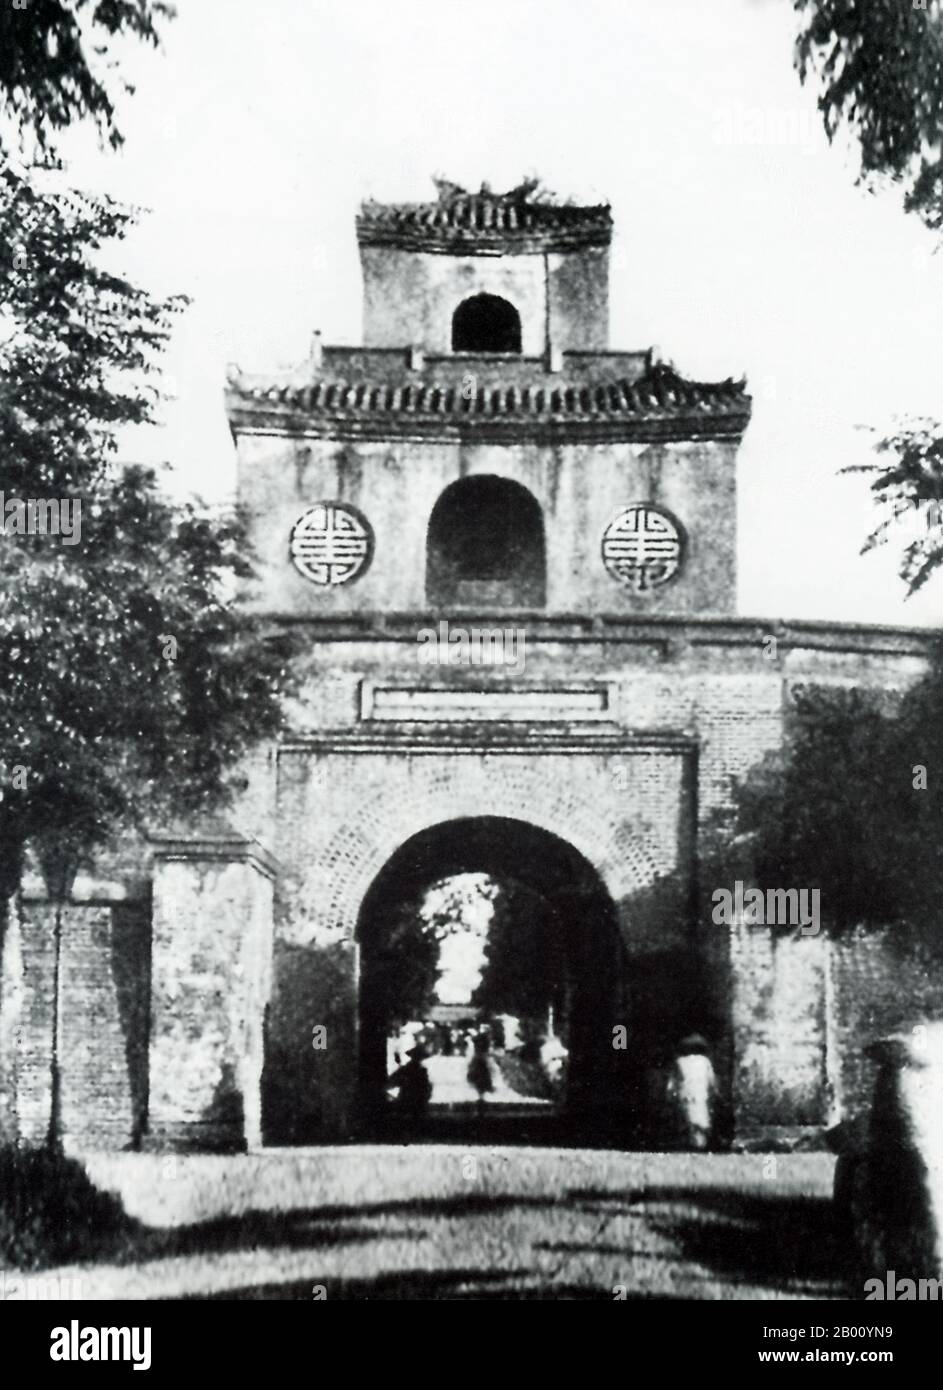 Vietnam: The ancient gate leading from the Imperial Citadel to Dong Ba market, Hue (early 20th century).  The Imperial City of Hue was surrounded by a wall 2 x 2 km, and the wall was surrounded by a moat. The water from the moat was taken from the Huong River (Perfume River) that flows through Hue. This structure is called the citadel. In June 1802, Nguyen Phuc Anh took control of Vietnam and proclaimed himself Emperor Gia Long. His rule was recognized by China in 1804, the same year construction began on the new palace and citadel. Stock Photo